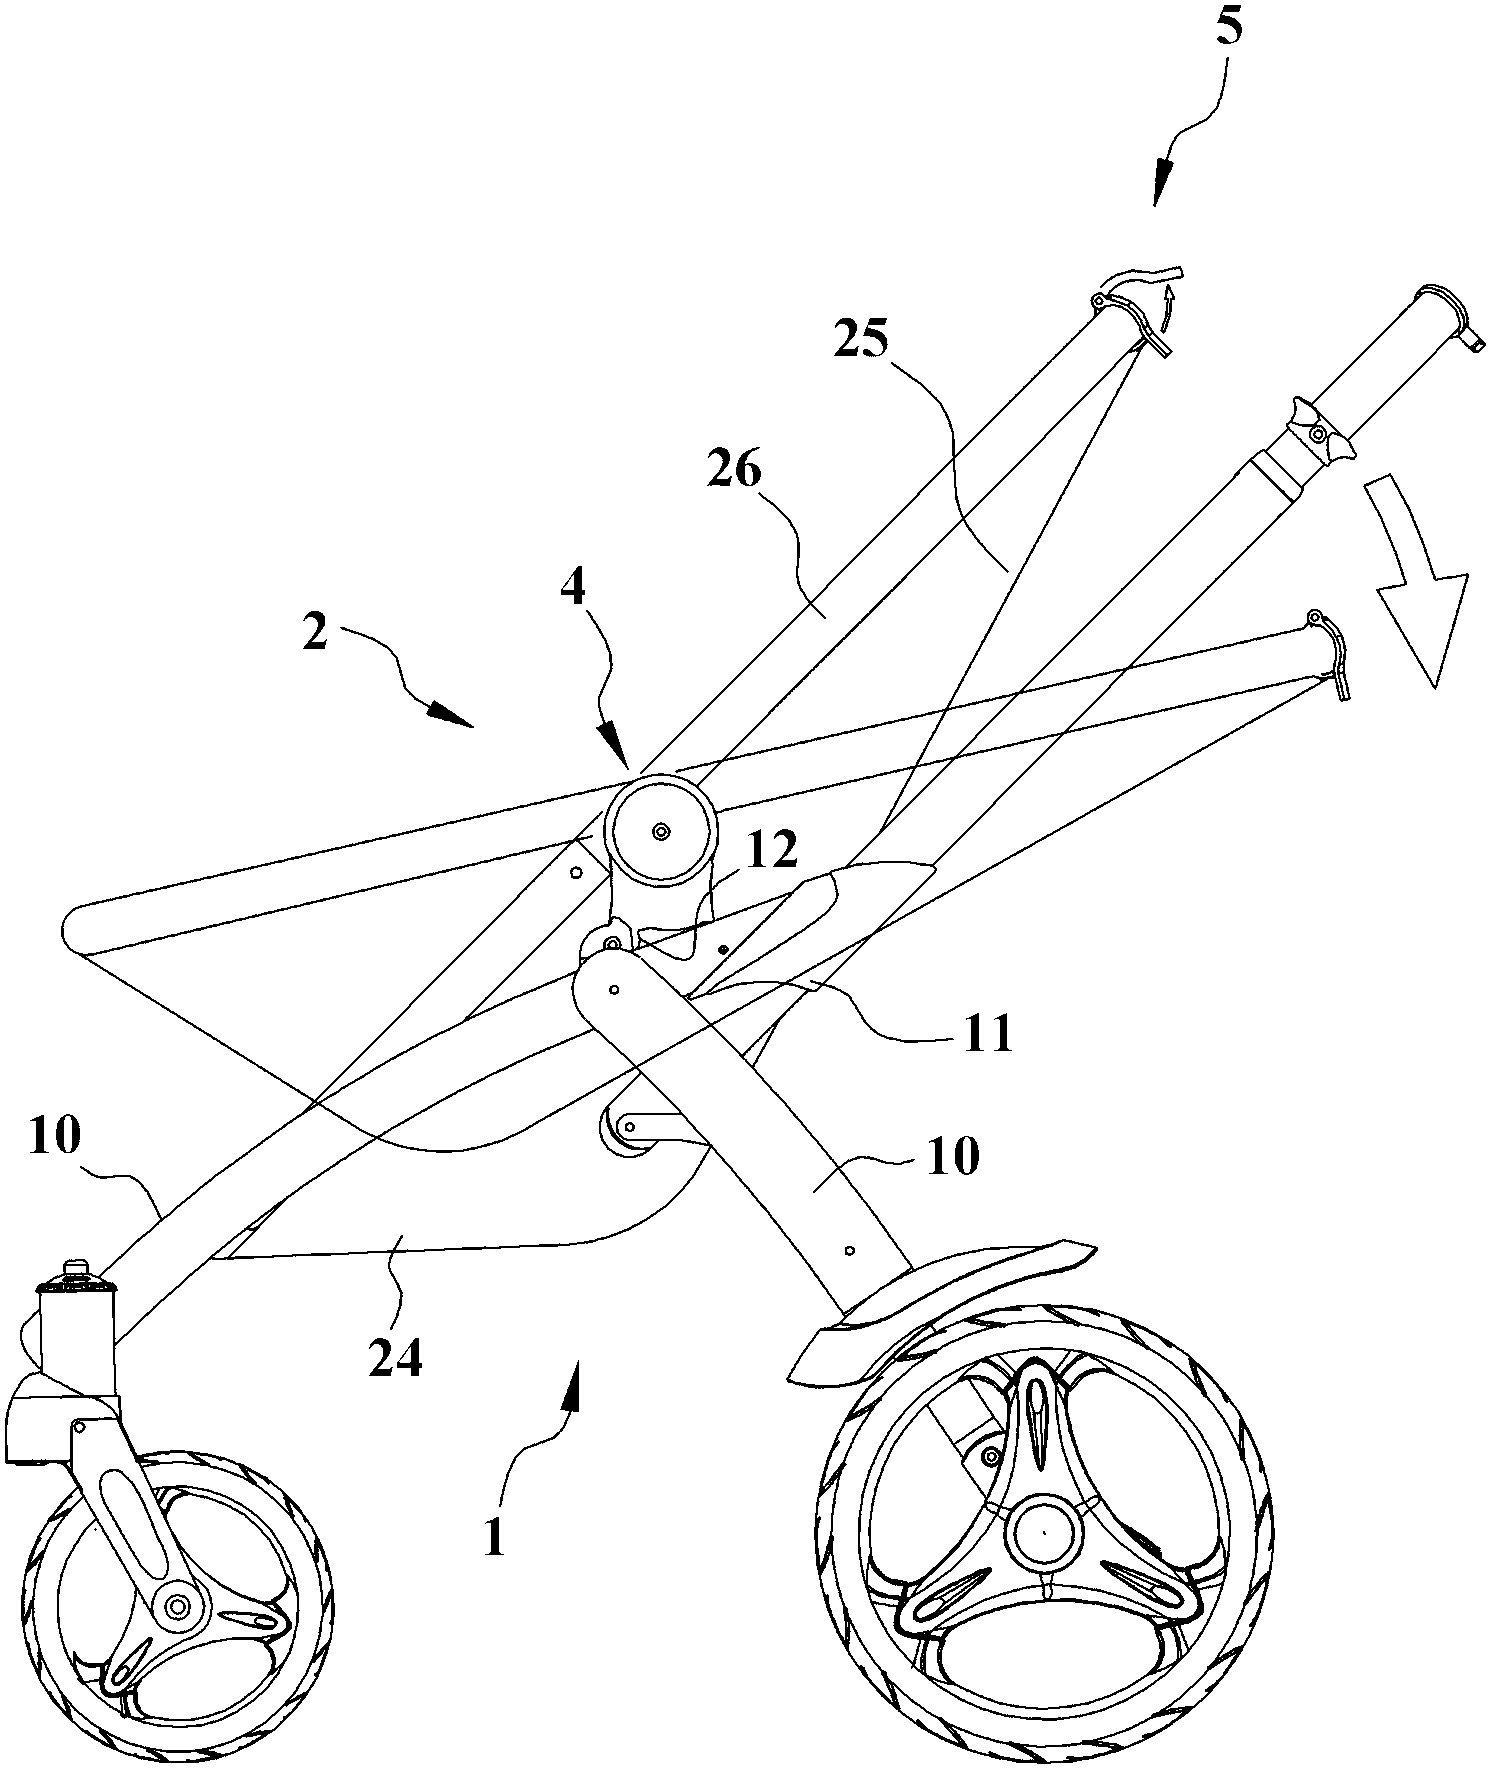 Load bearing unit of carrying tool for babies